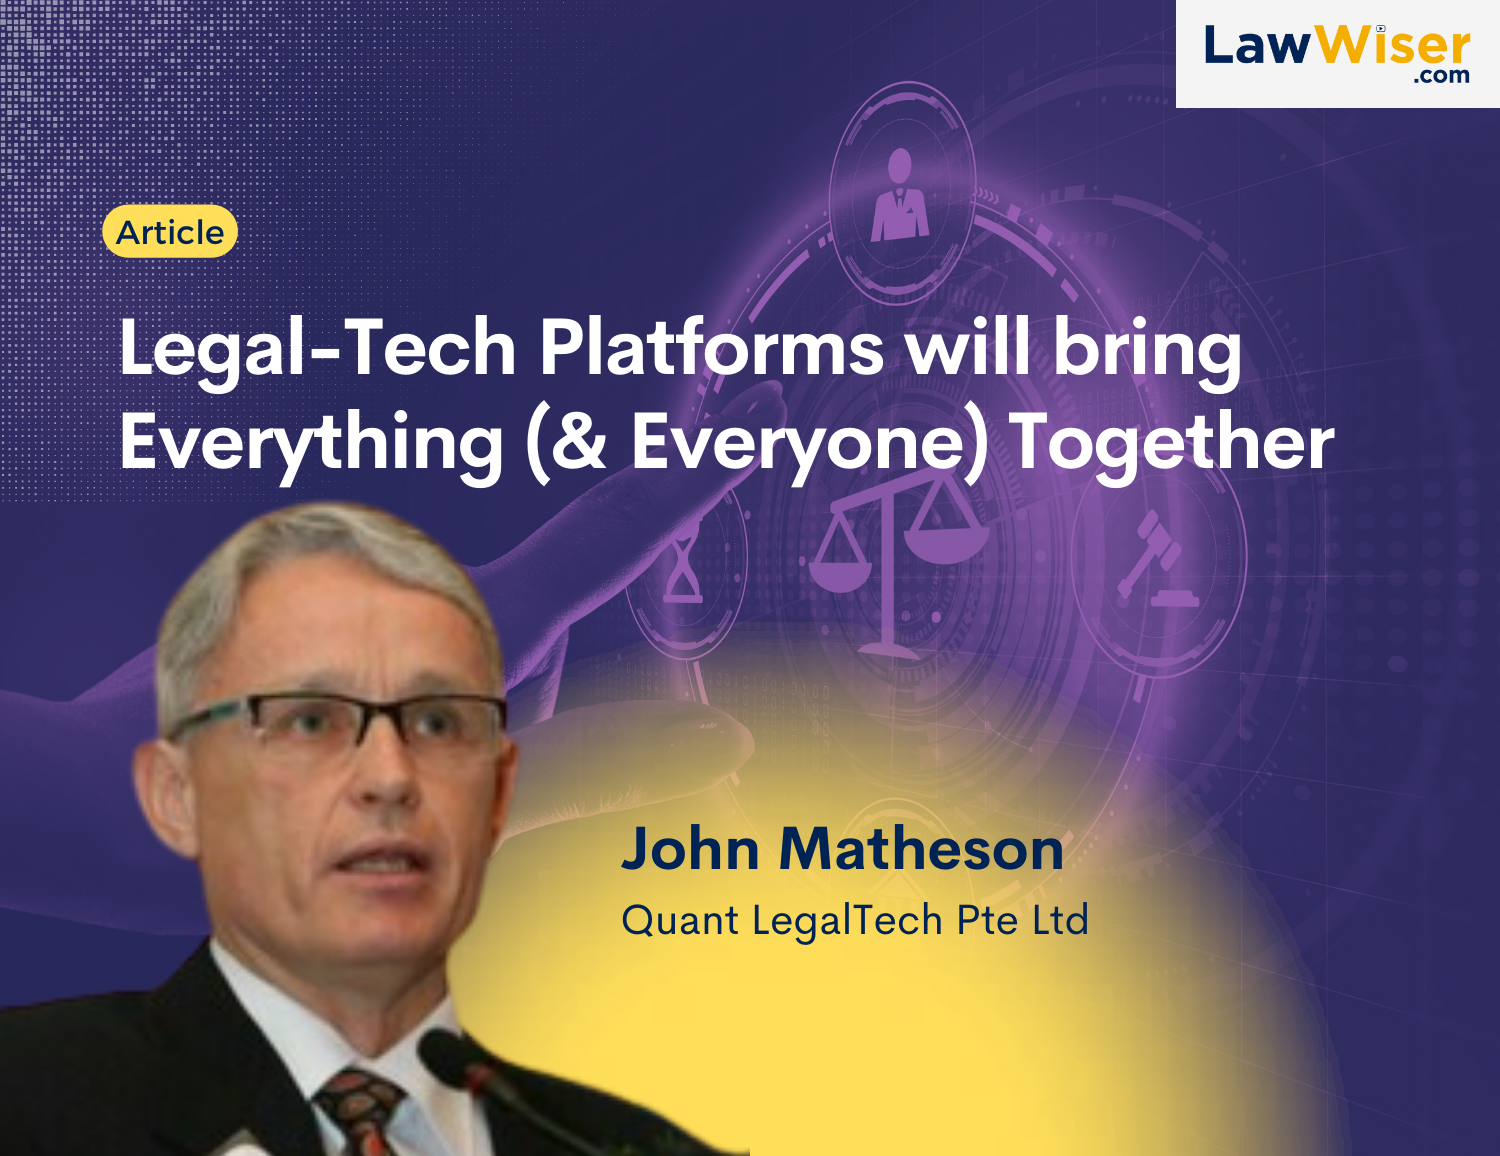 Legal-Tech Platforms will bring Everything (& Everyone) Together